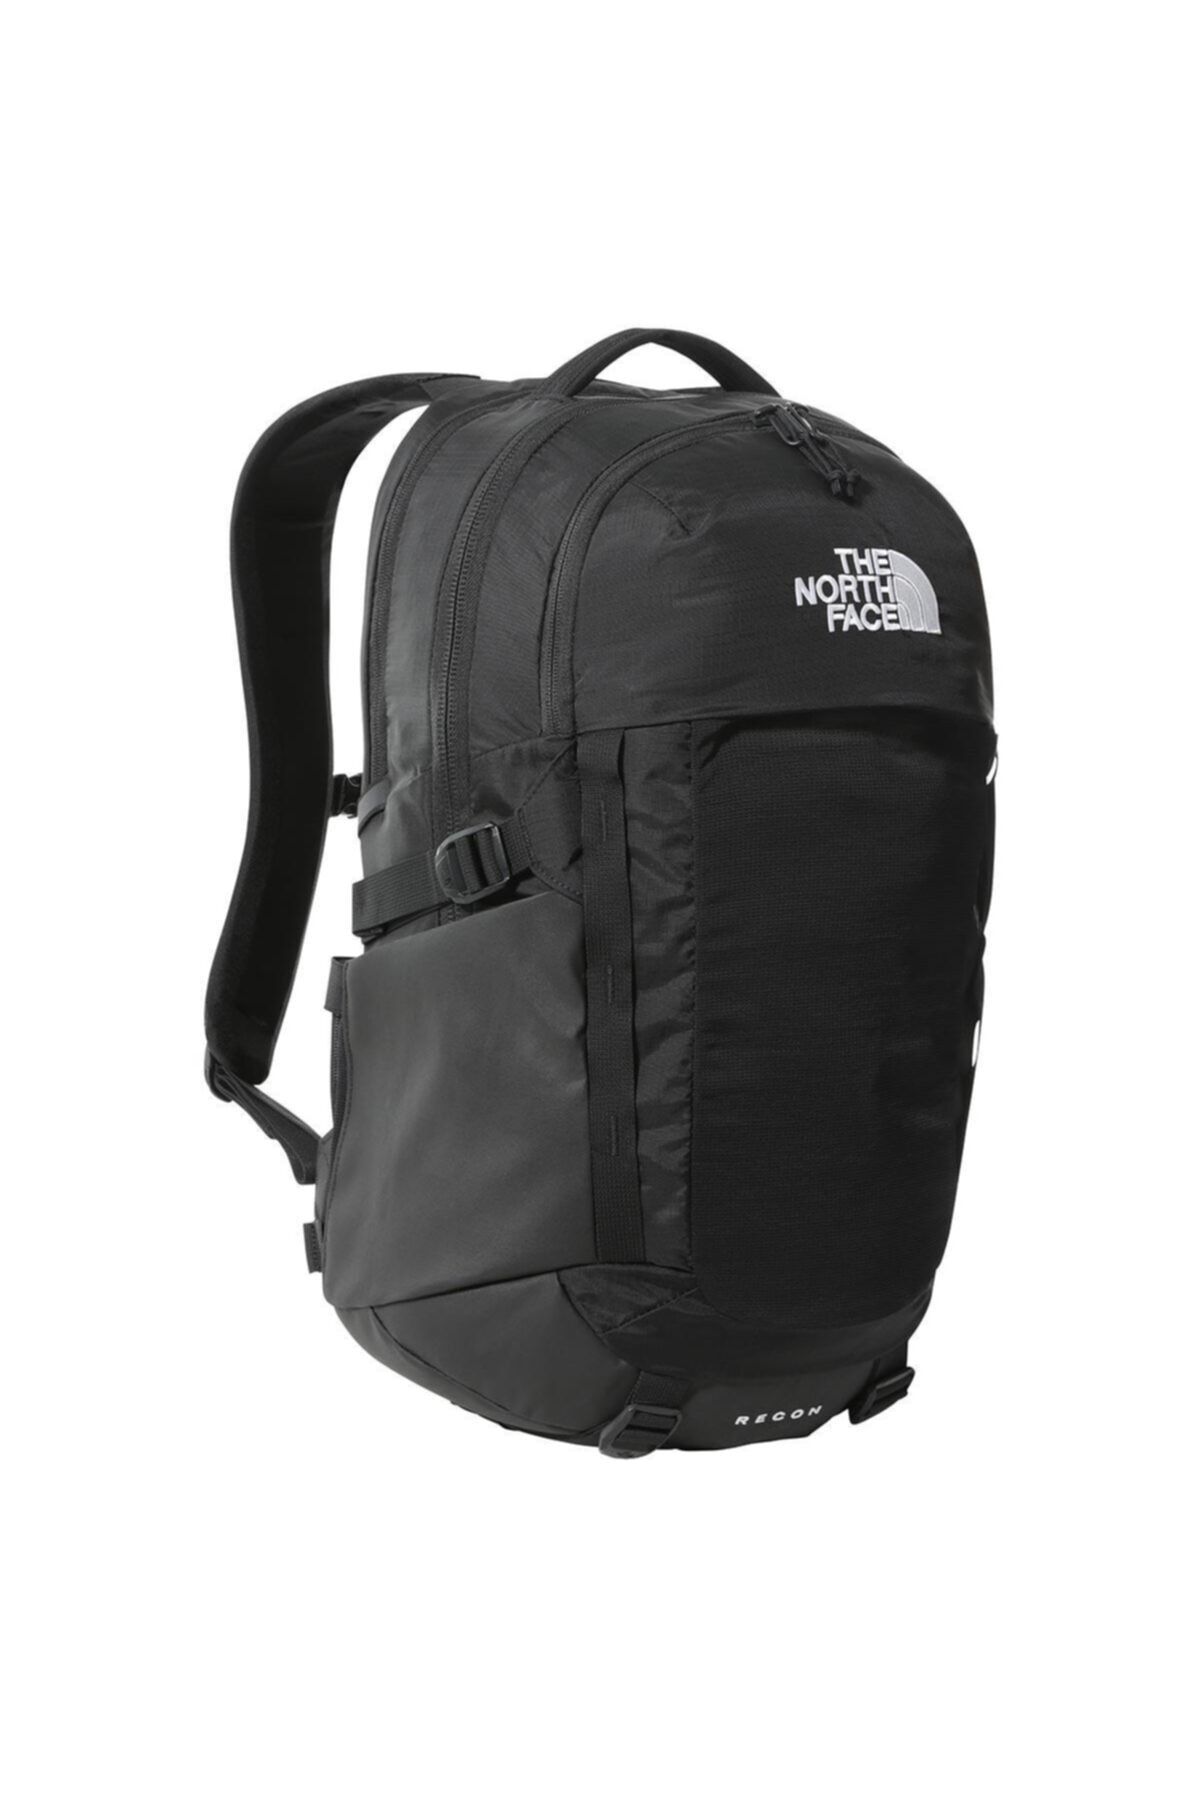 The North Face The Northface Recon Nf0a52shkx71